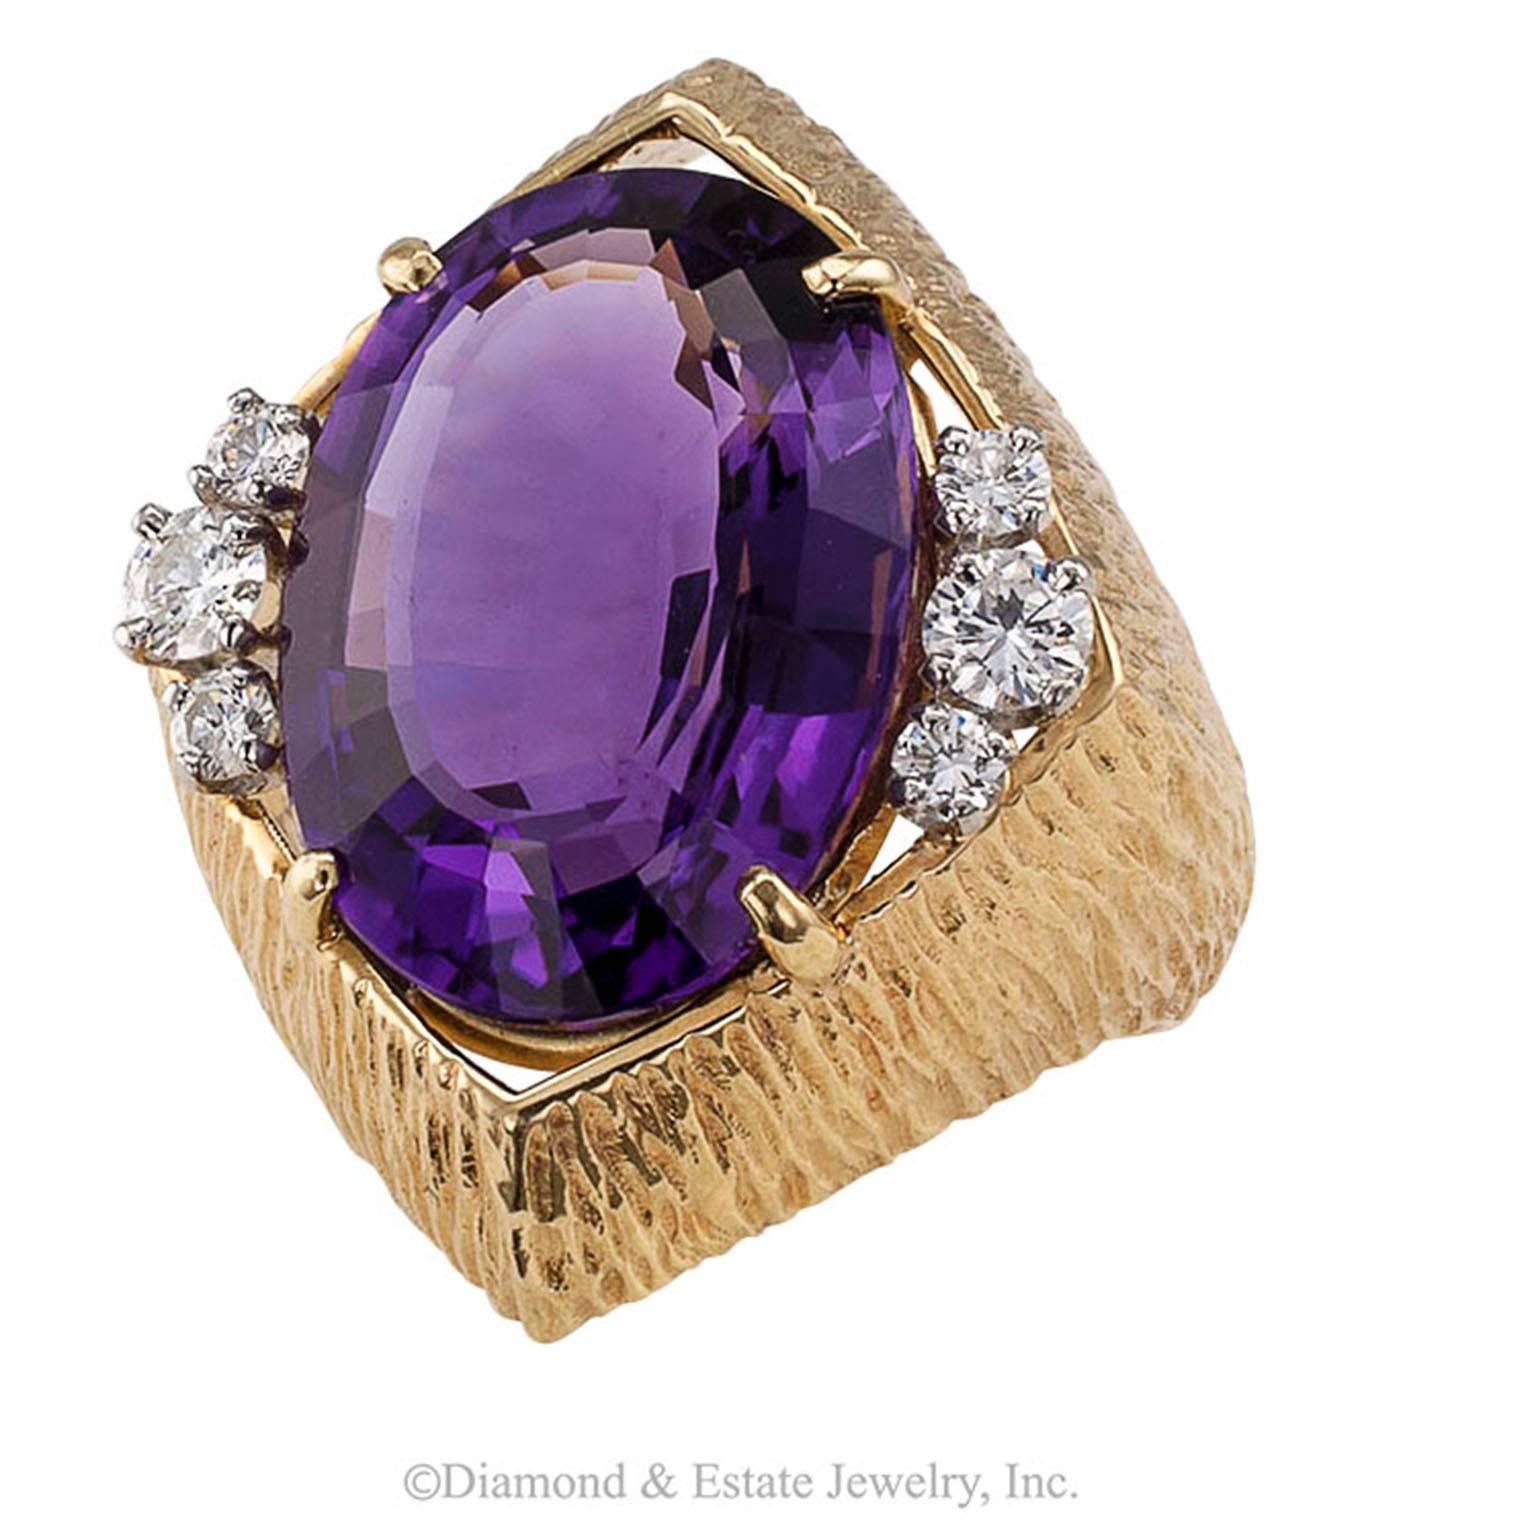 Amethyst Diamond Cocktail Ring

1970s Large oval amethyst and diamond textured gold cocktail ring.  It is one of those rings that grabs your attention and refuses to let go of it.  The bright royal purple amethyst weighing approximately 11.00